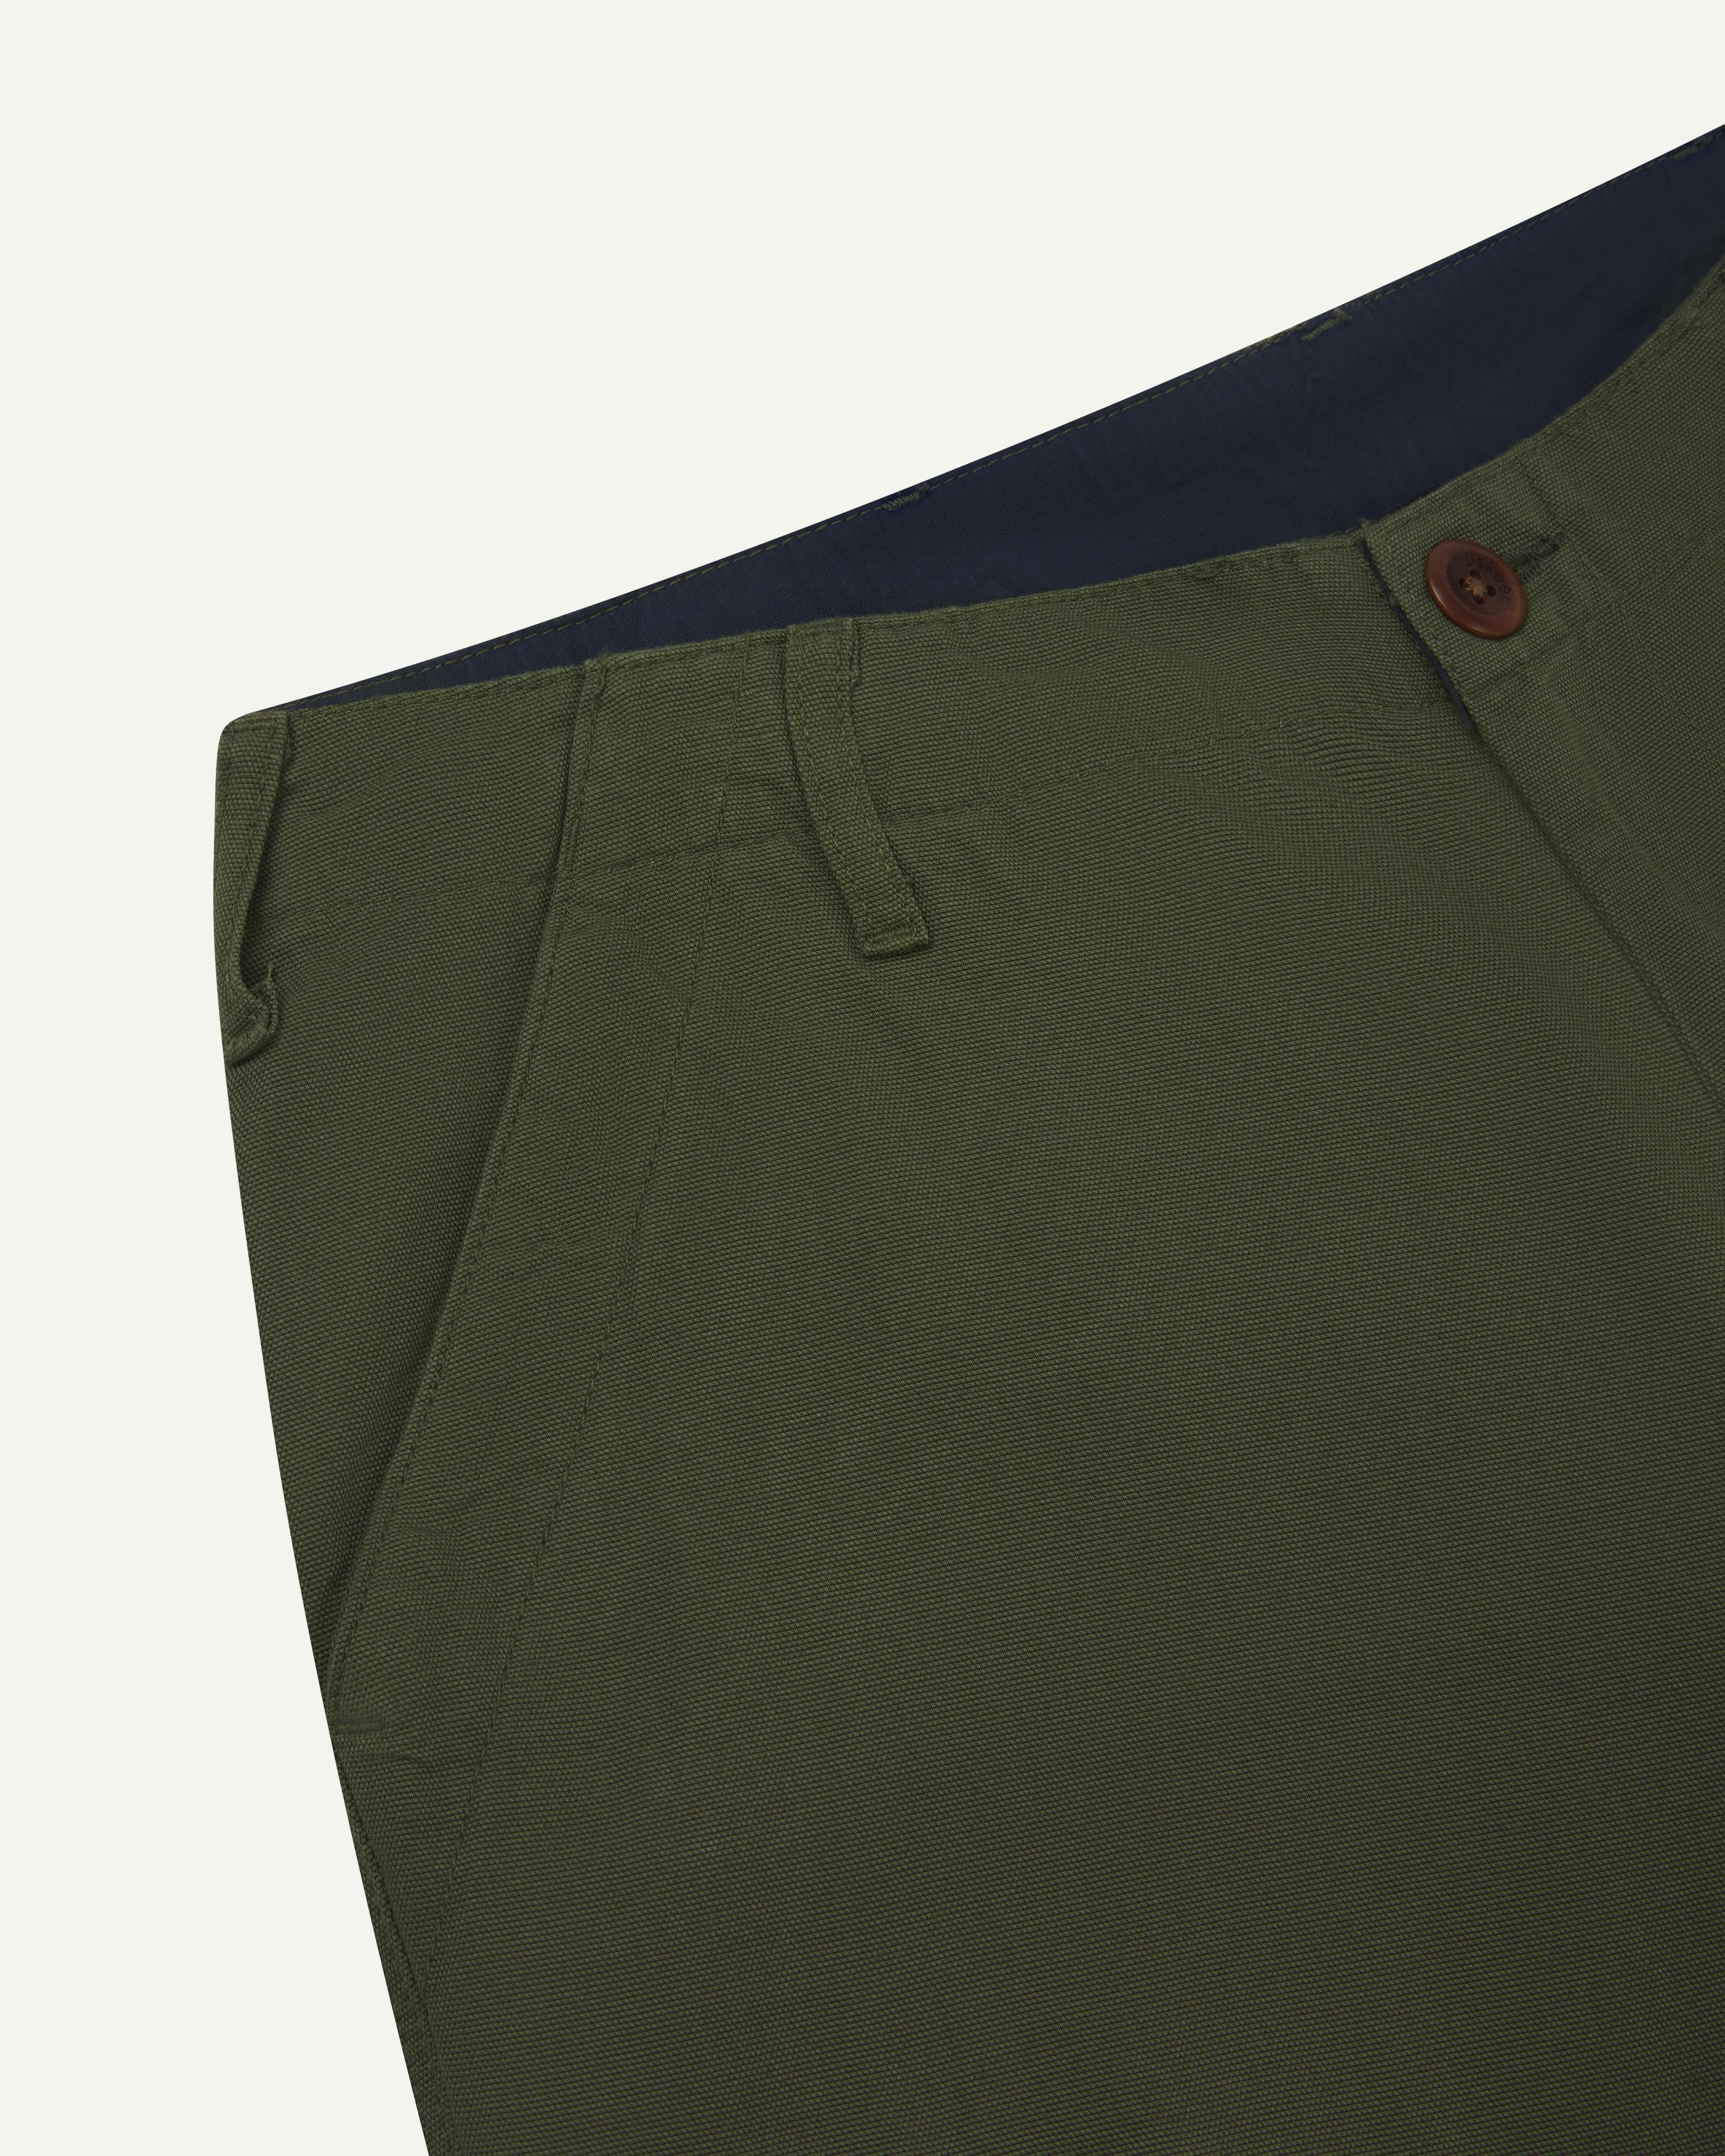 Close up shot of front waistband of the Uskees #5005 workwear pants in 'coriander' green showing Corozo button, belt loops and pockets.